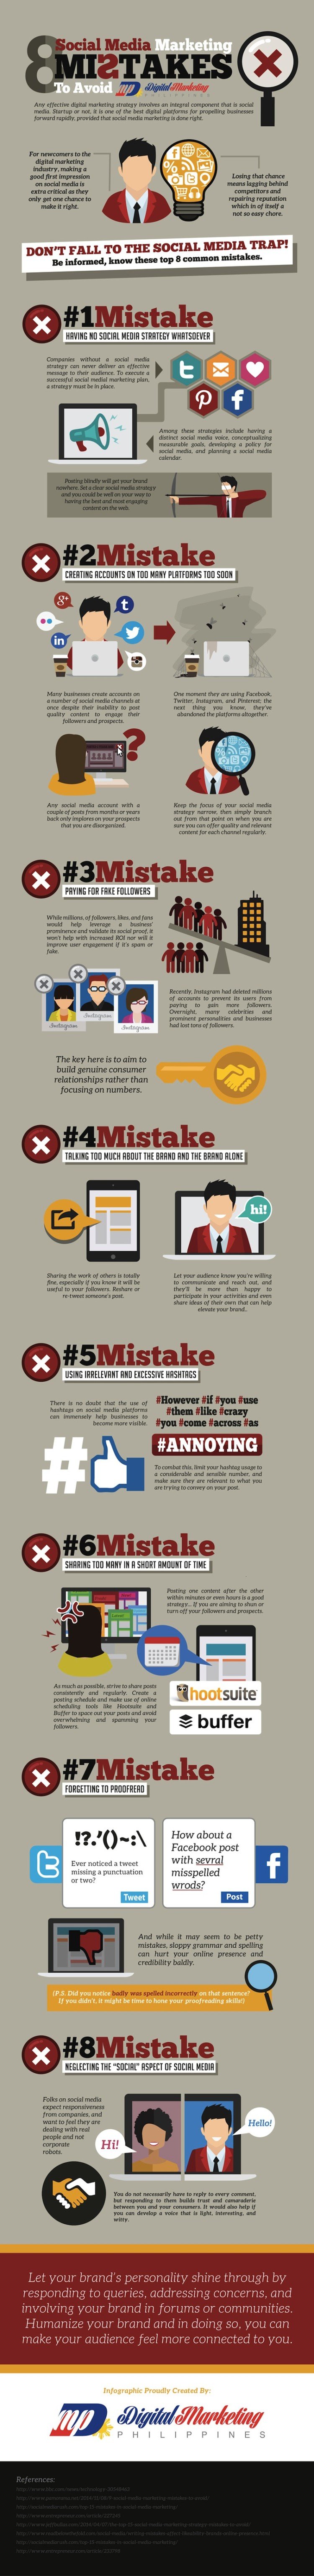 8 Social Media Mistakes to Avoid [Infographic]